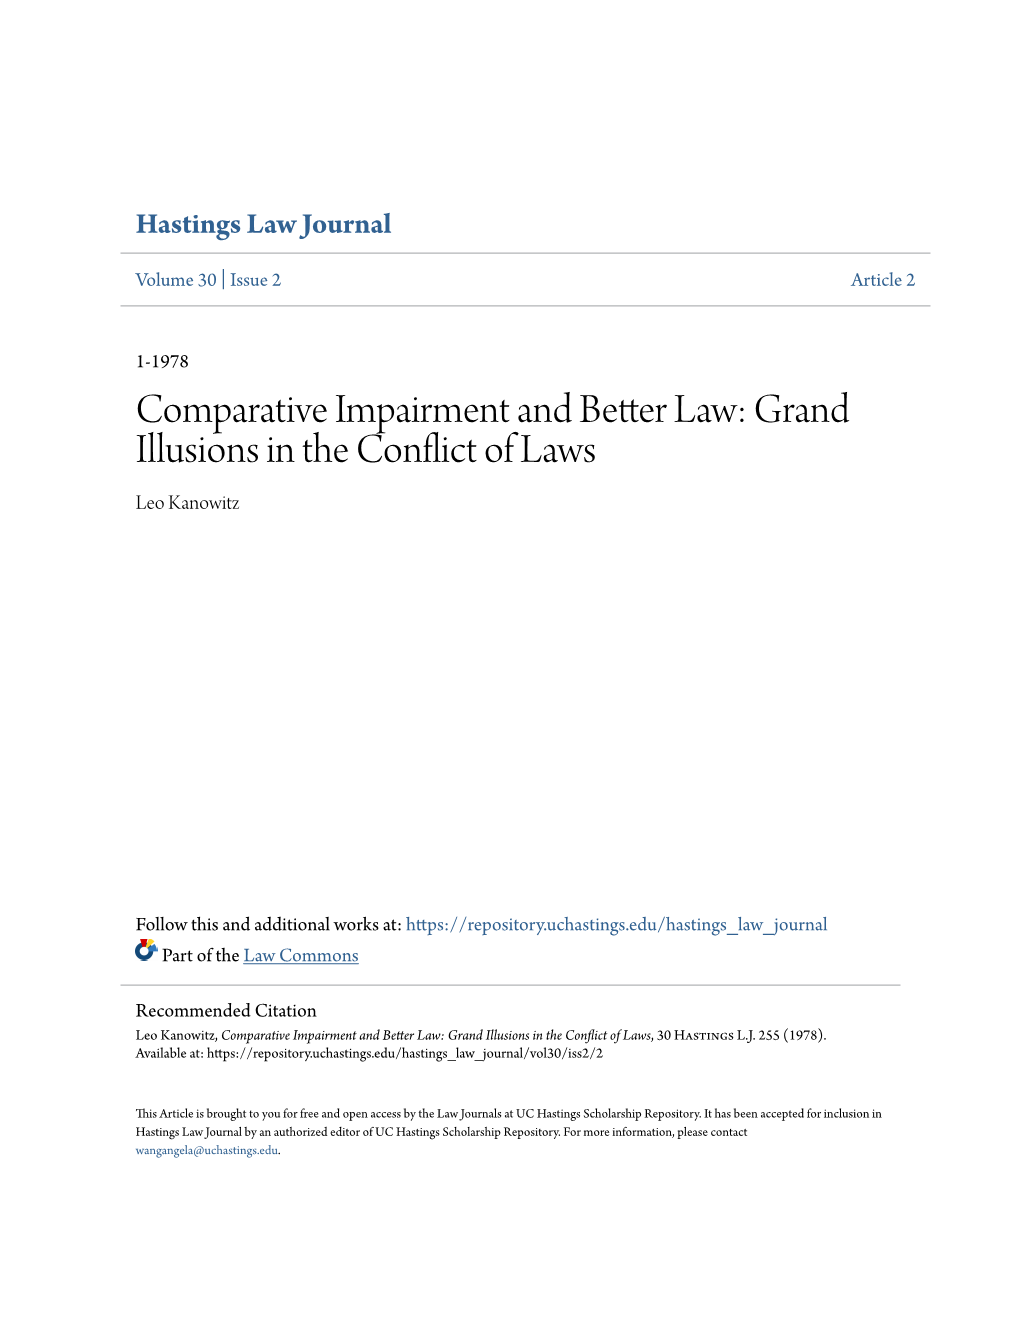 Comparative Impairment and Better Law: Grand Illusions in the Conflict of Laws Leo Kanowitz